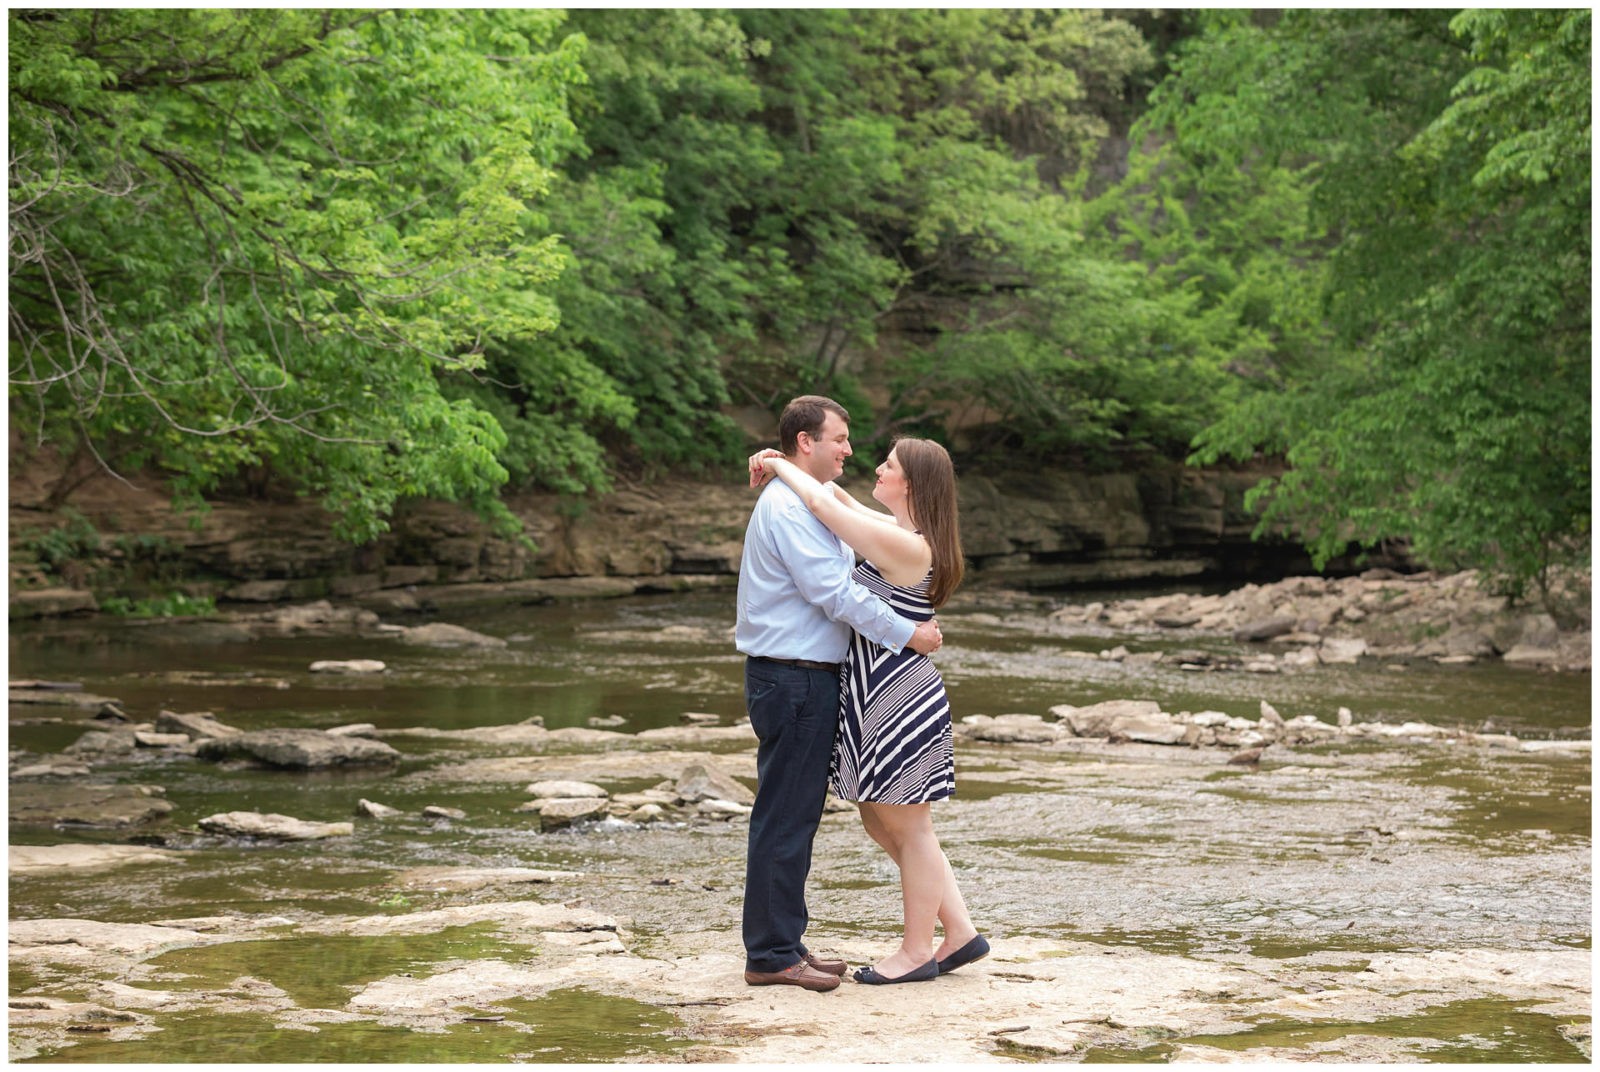 Engagement photos at Big Rock Park in Louisville, KY